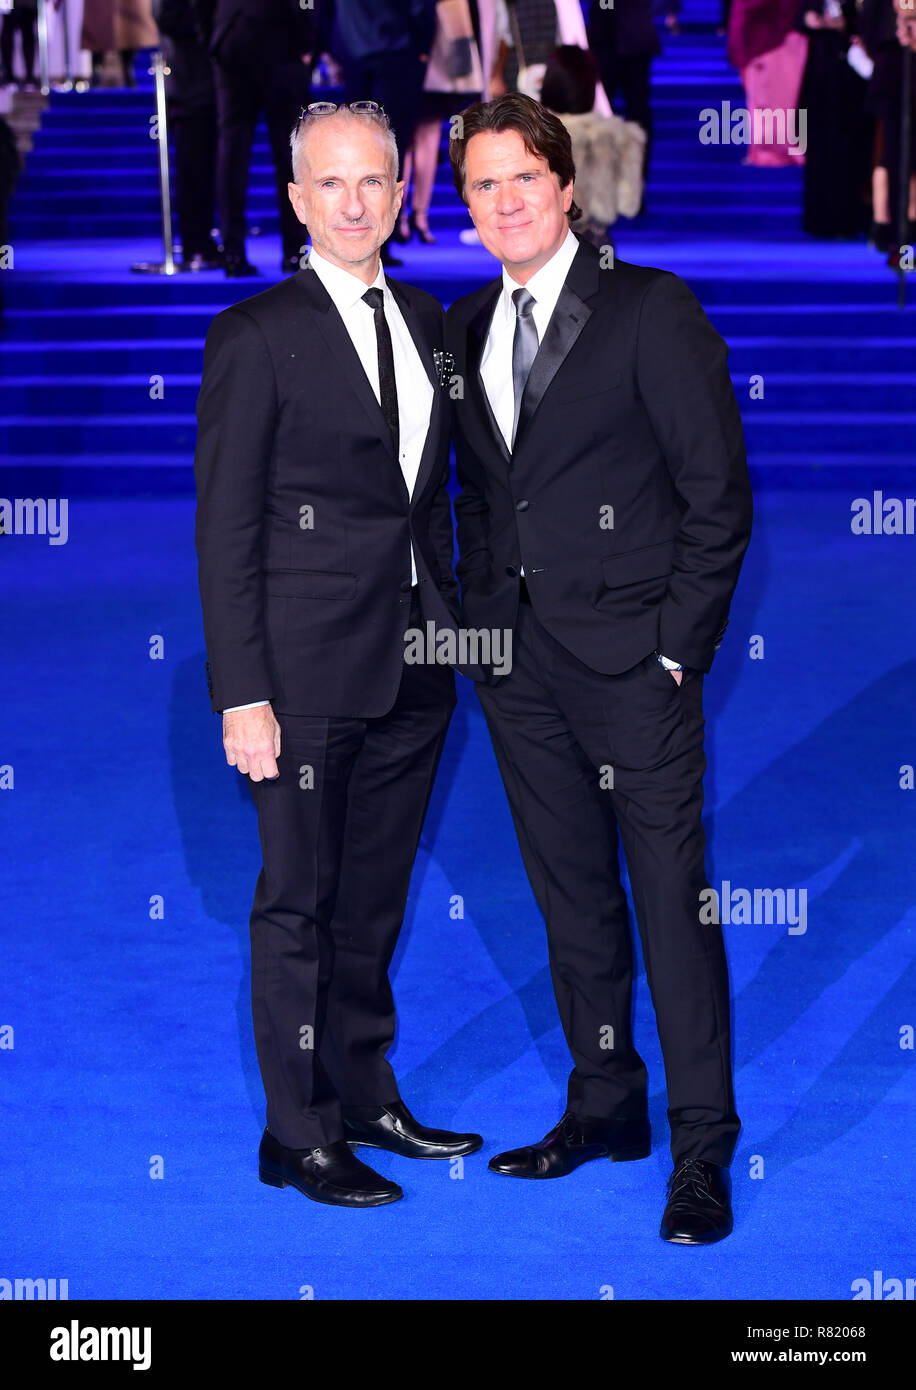 John Deluca (left) and Rob Marshall attending the Mary Poppins Returns European Premiere held at the Royal Albert Hall, London. Stock Photo